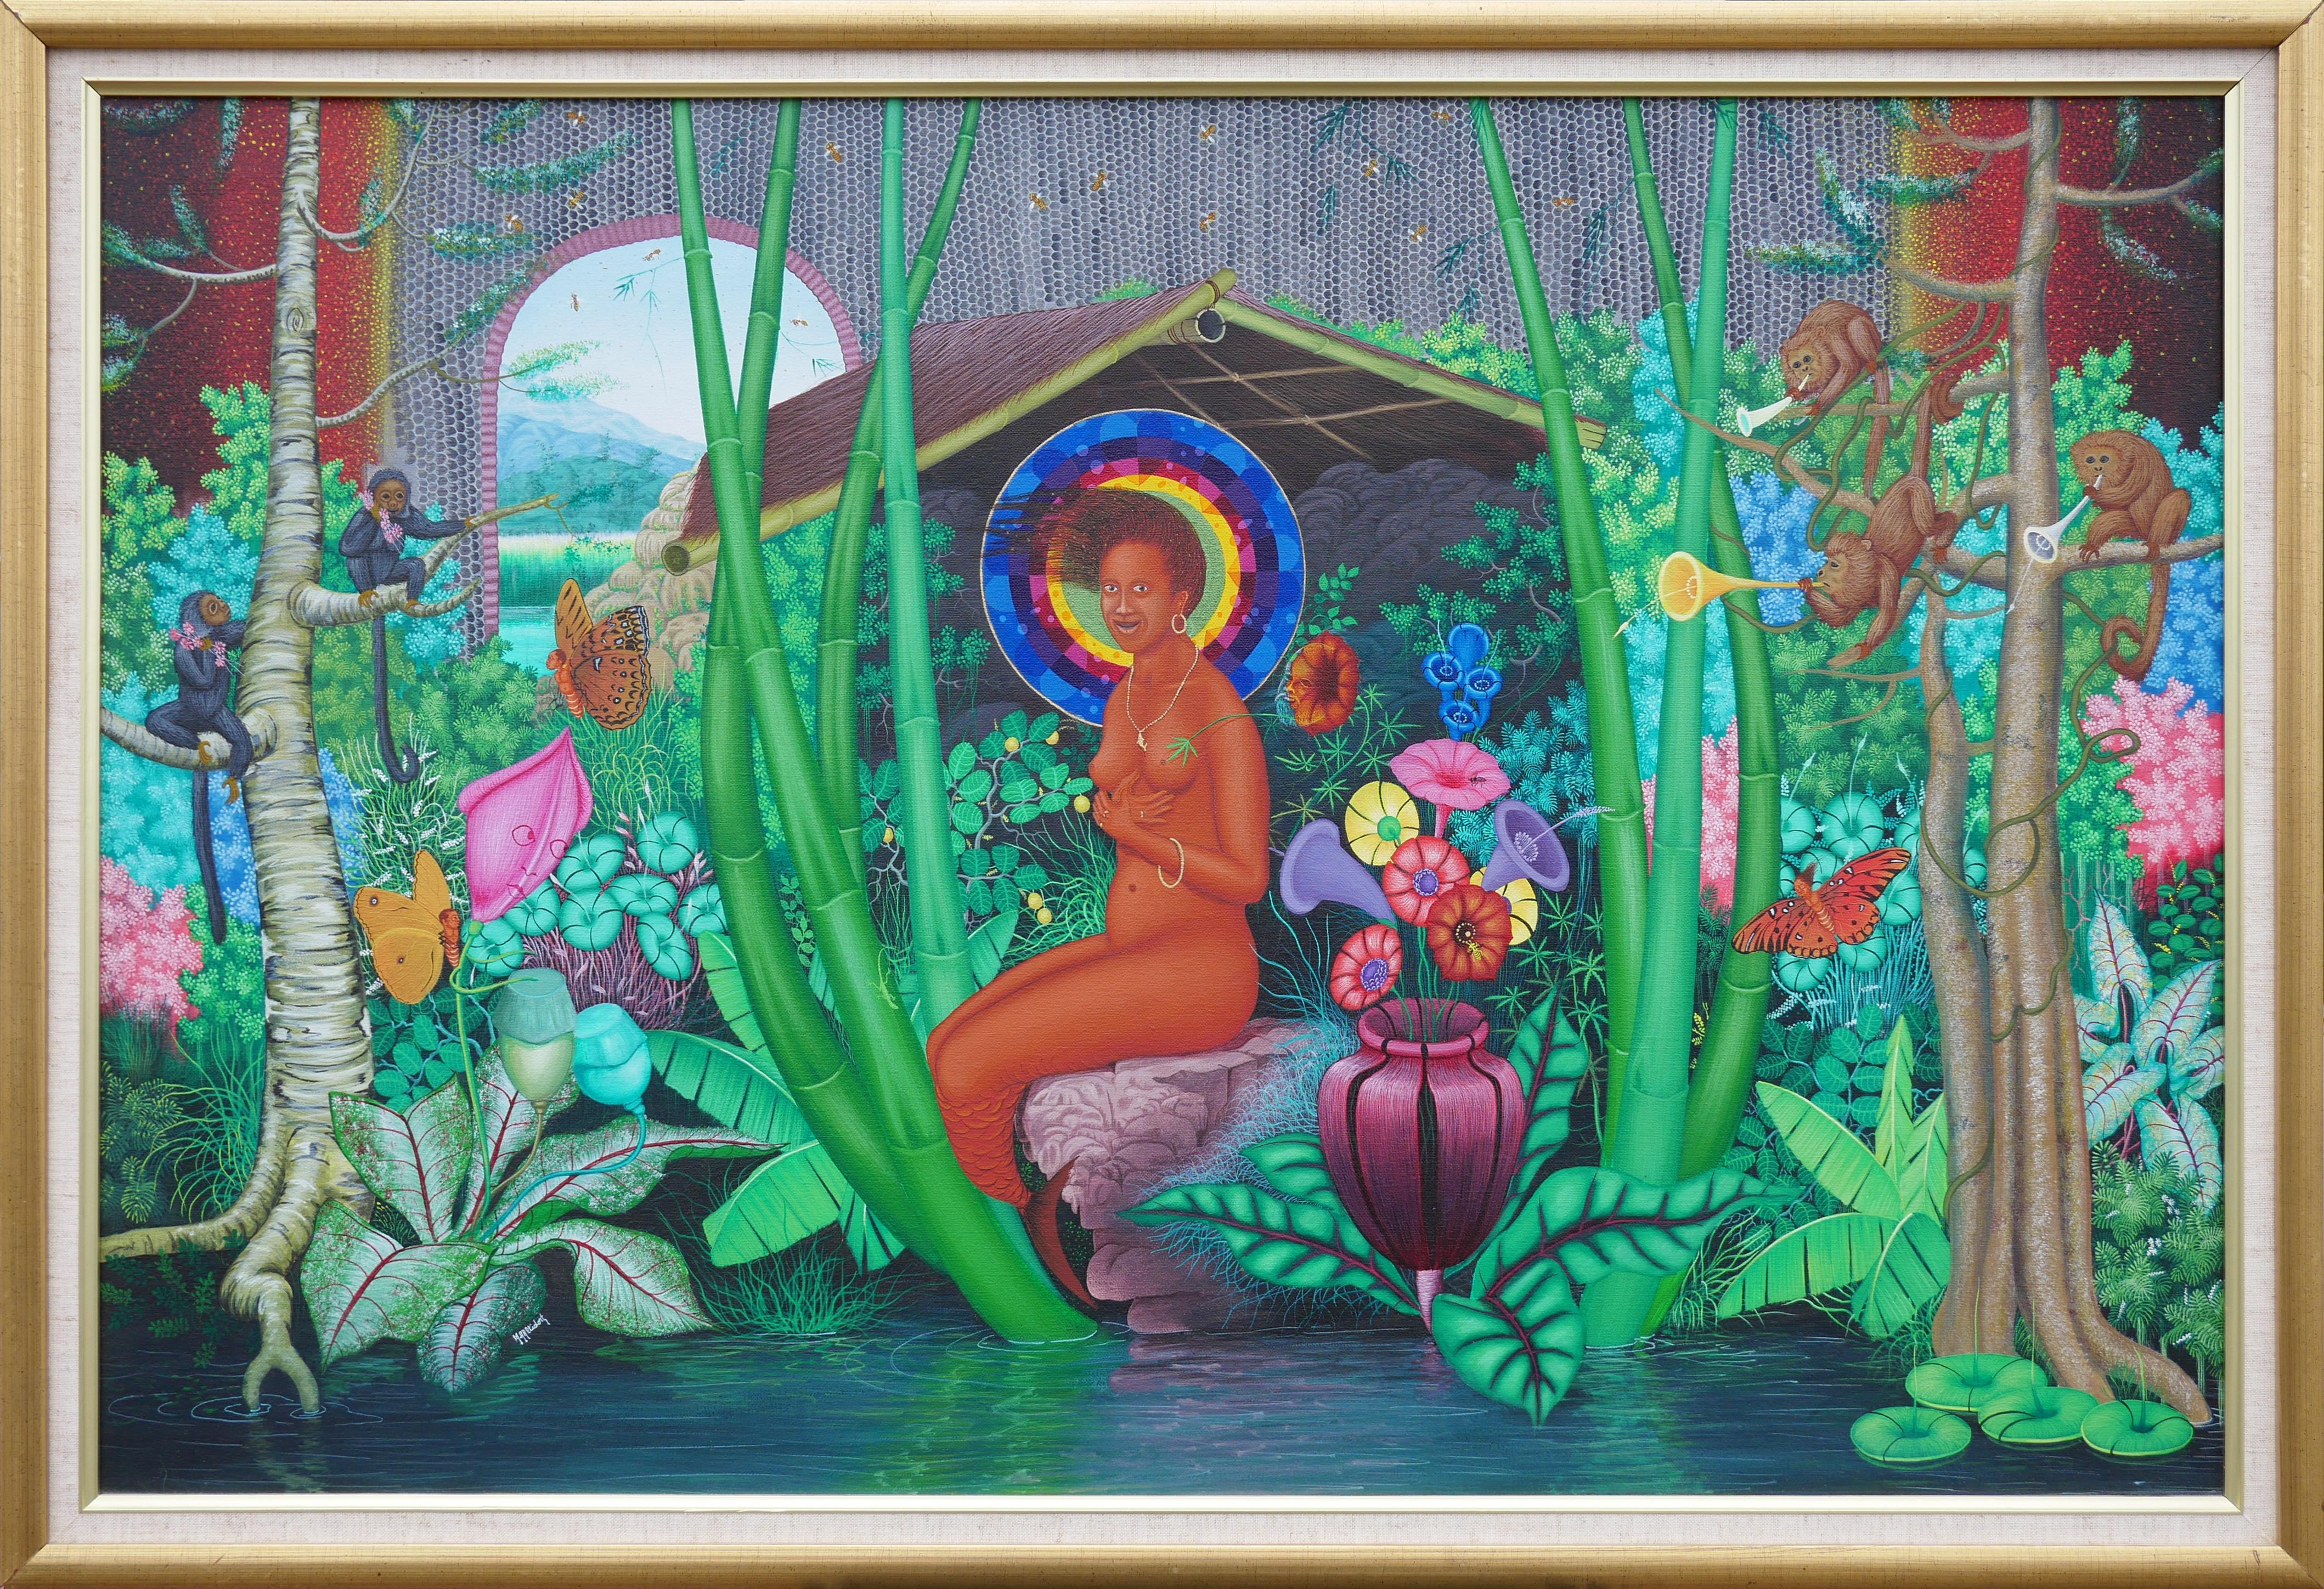 Michel-Ange Altidor Figurative Painting - Colorful Tropical Jungle Landscape with Central Nude Female Figure